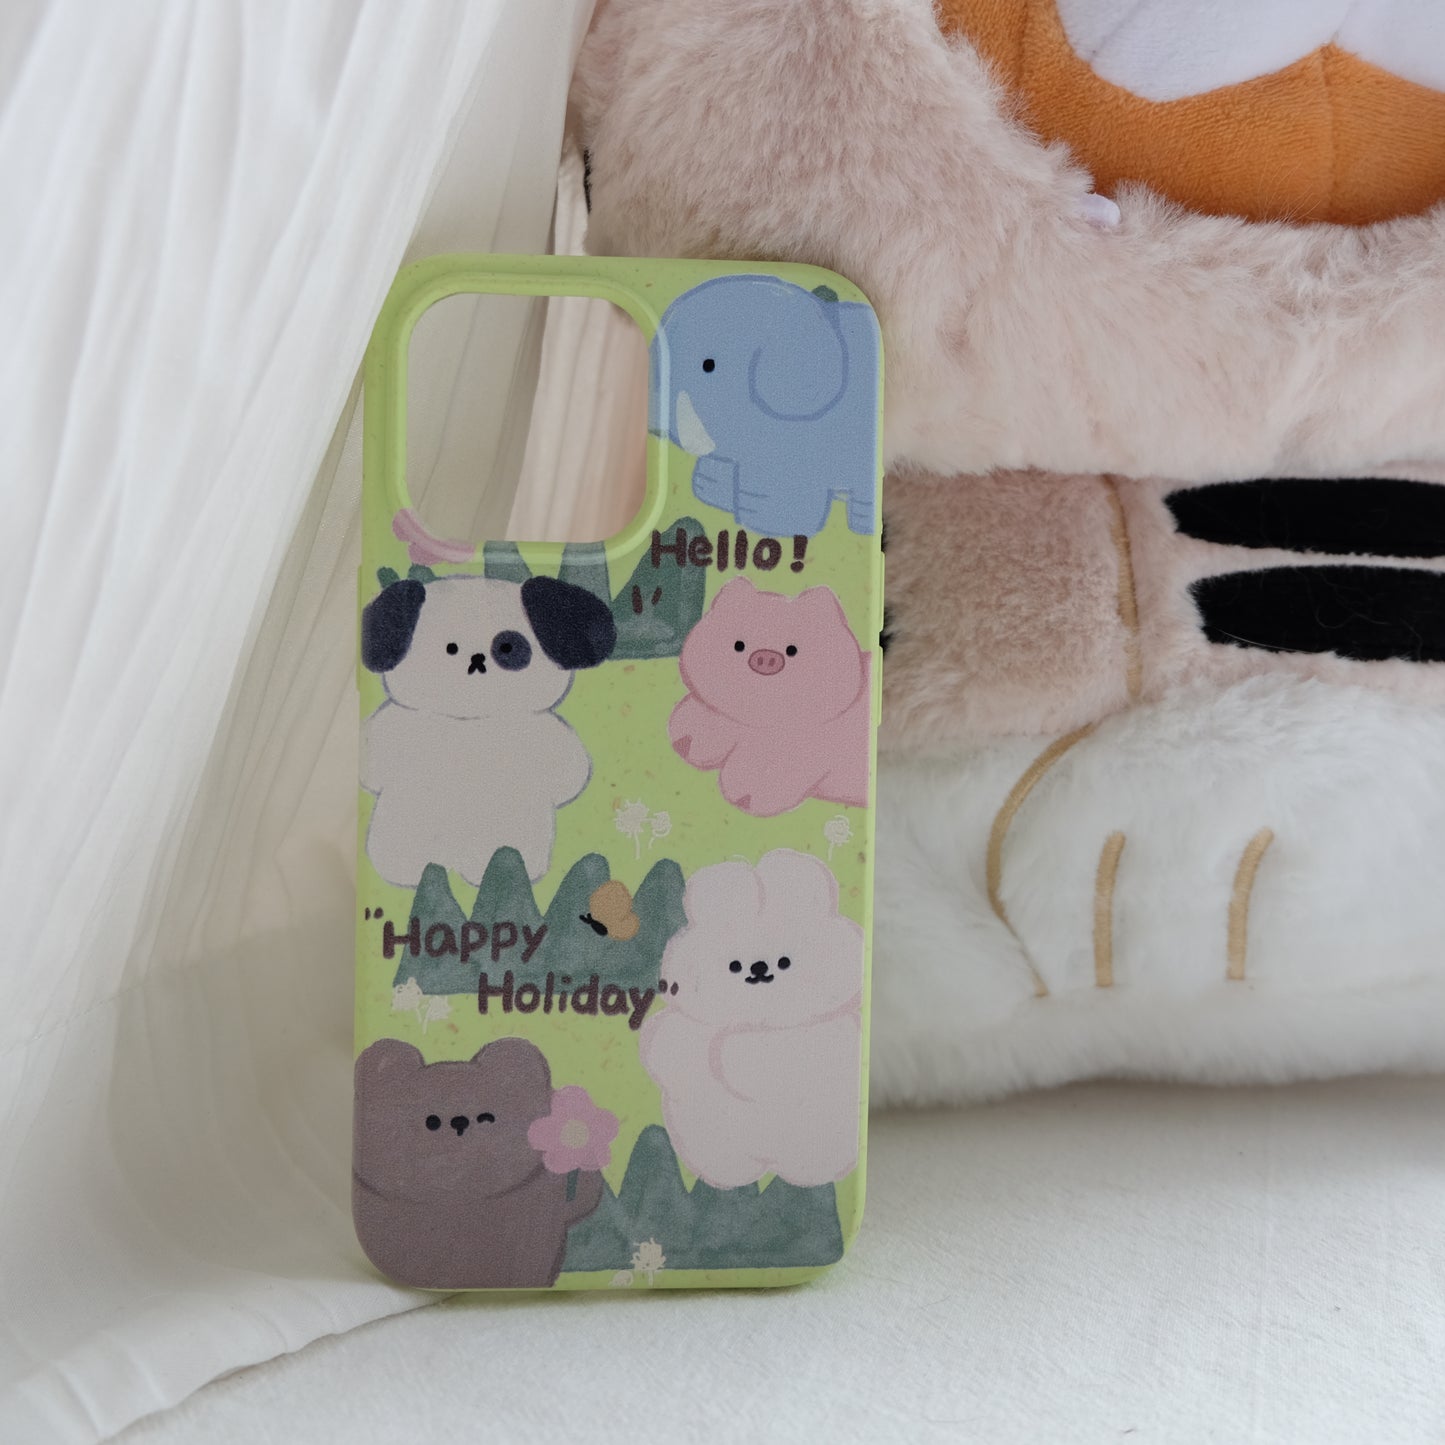 Happy holiday my friends degradable phone case | phone accessories | Three Fleas